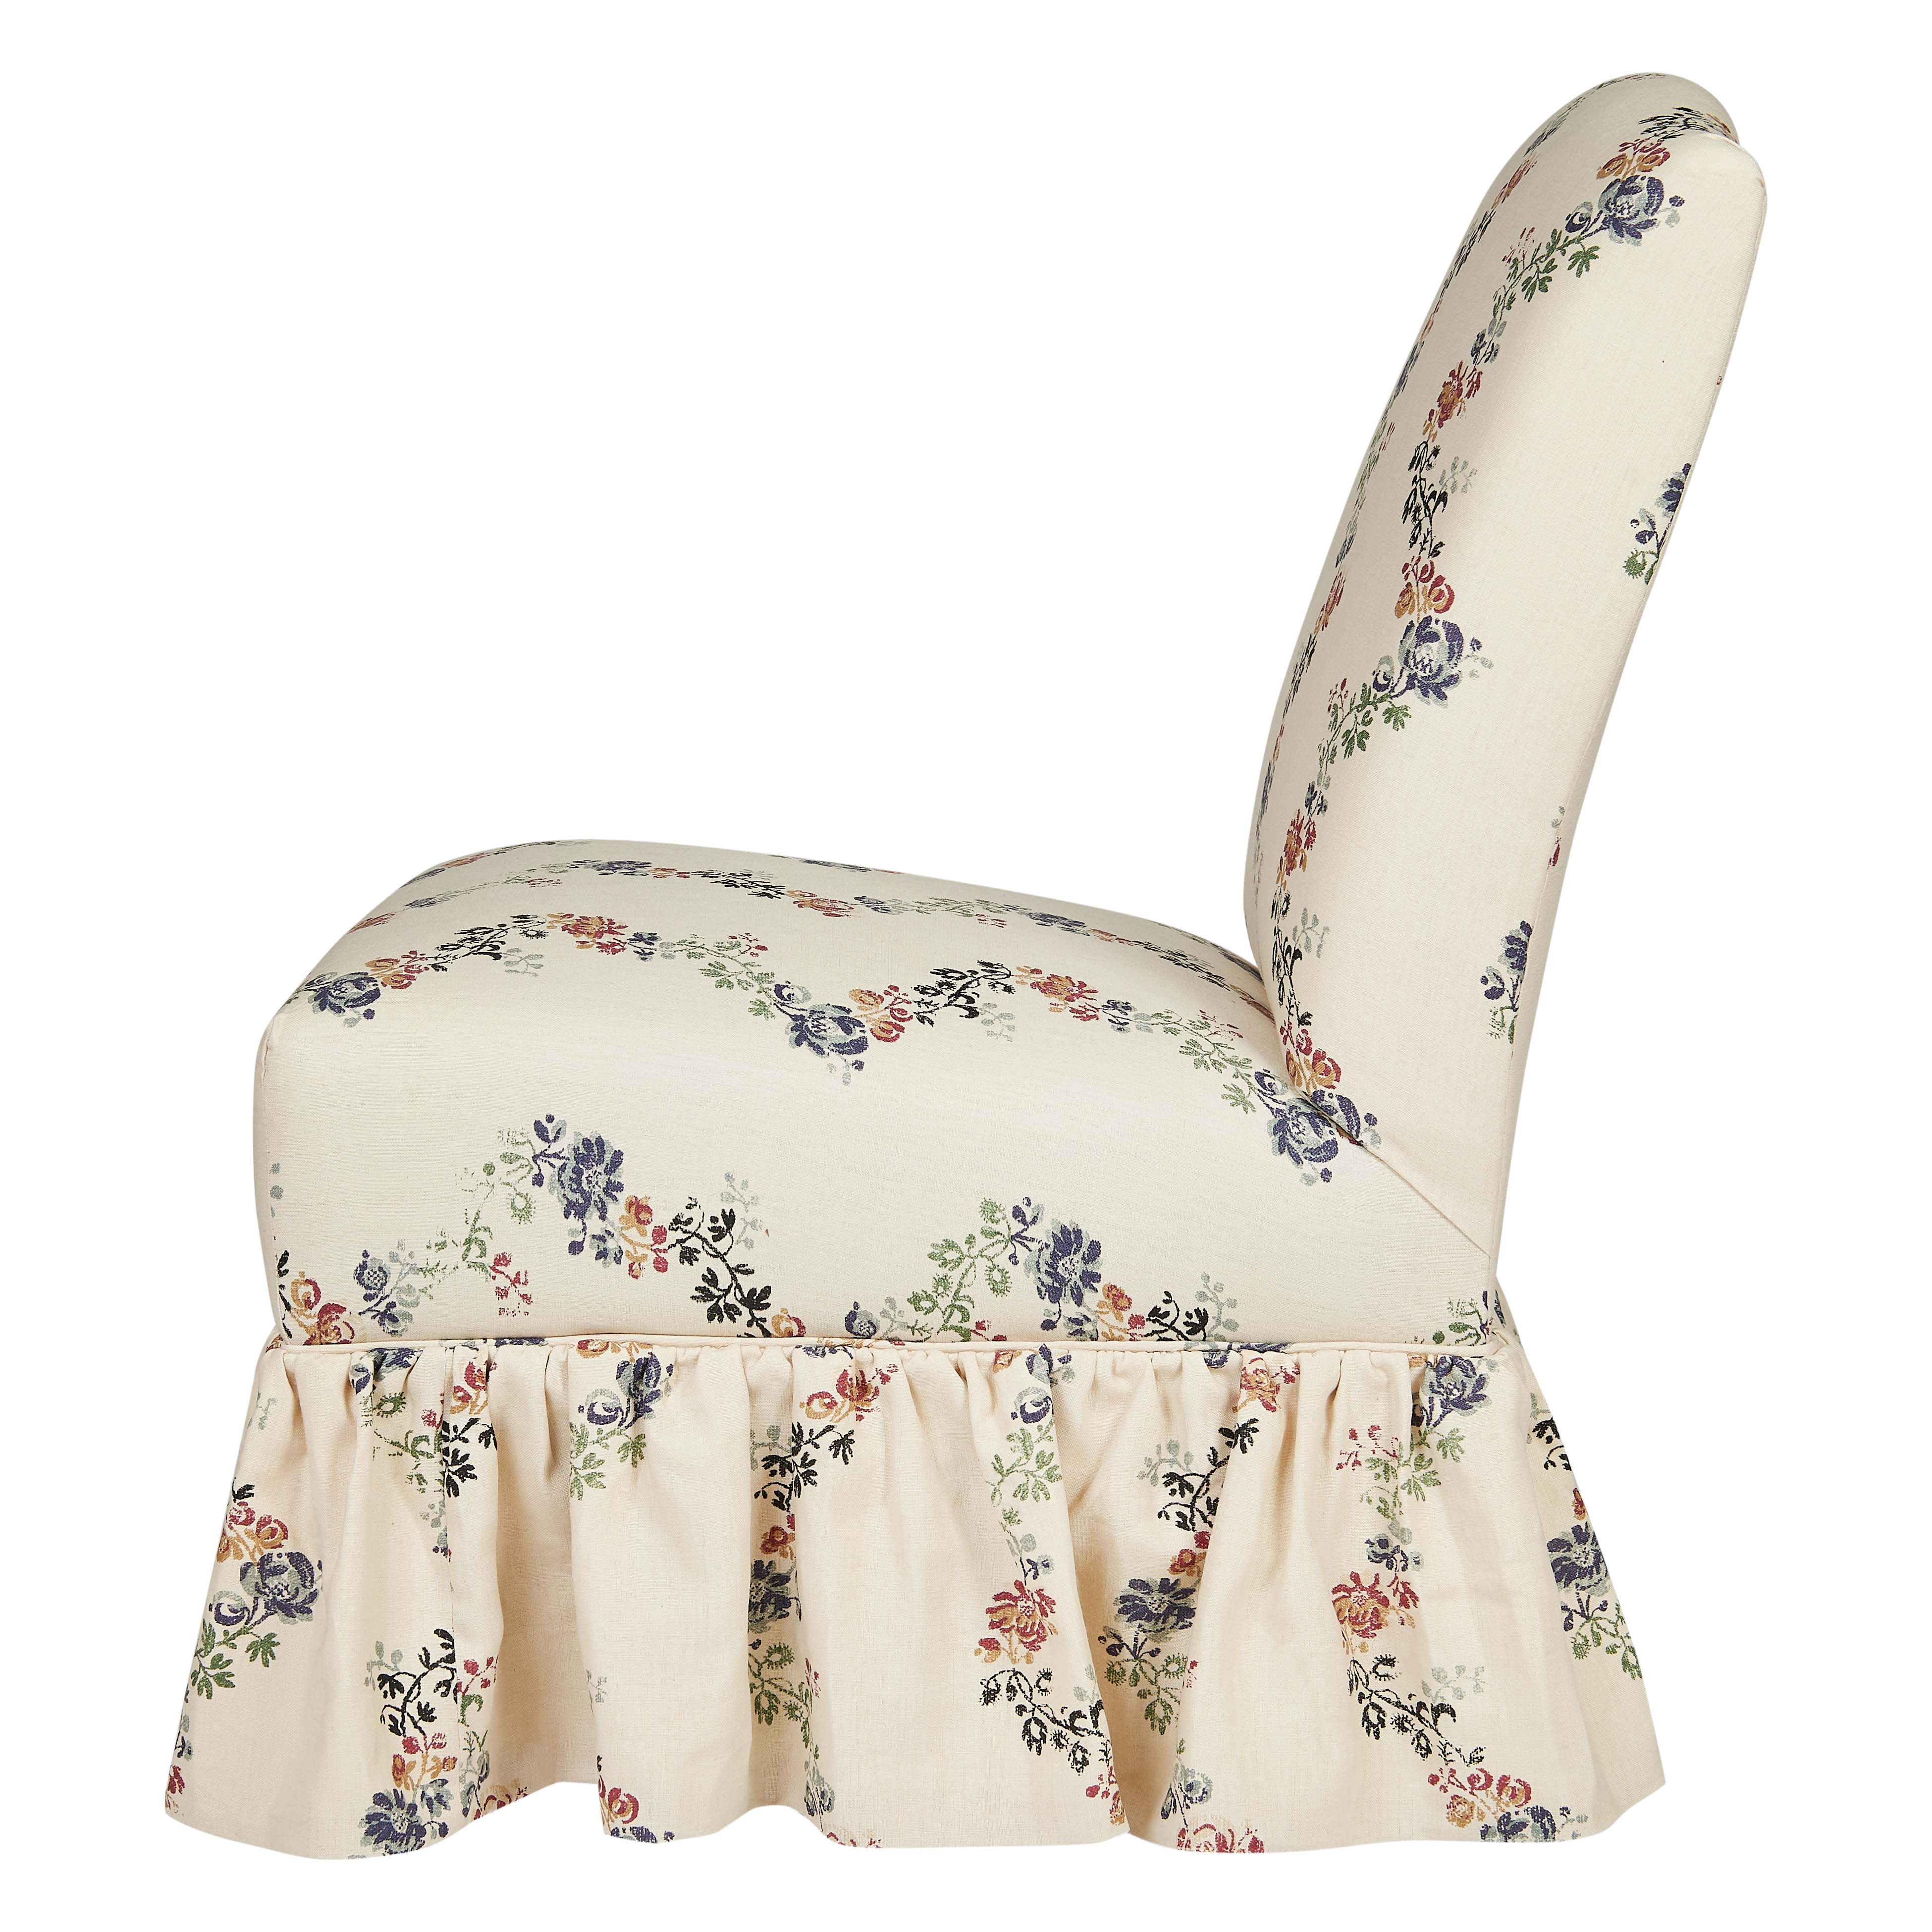 Slipper Chair in Vine Flower with Loose Pleated Skirt